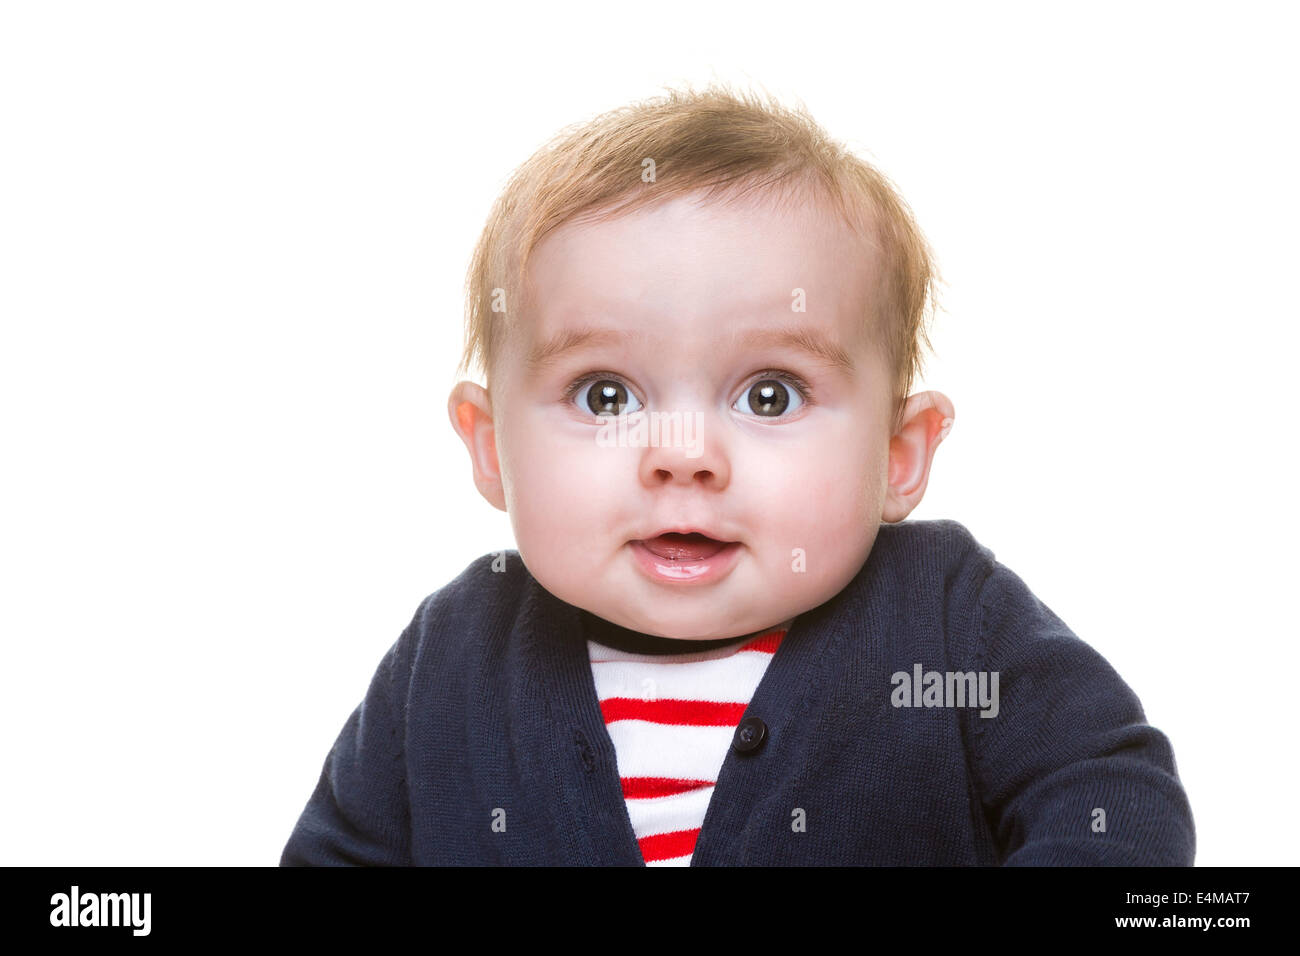 Happy Smiling Baby Girl in Blue Cardigan and Red Striped Top Isolated Stock Photo